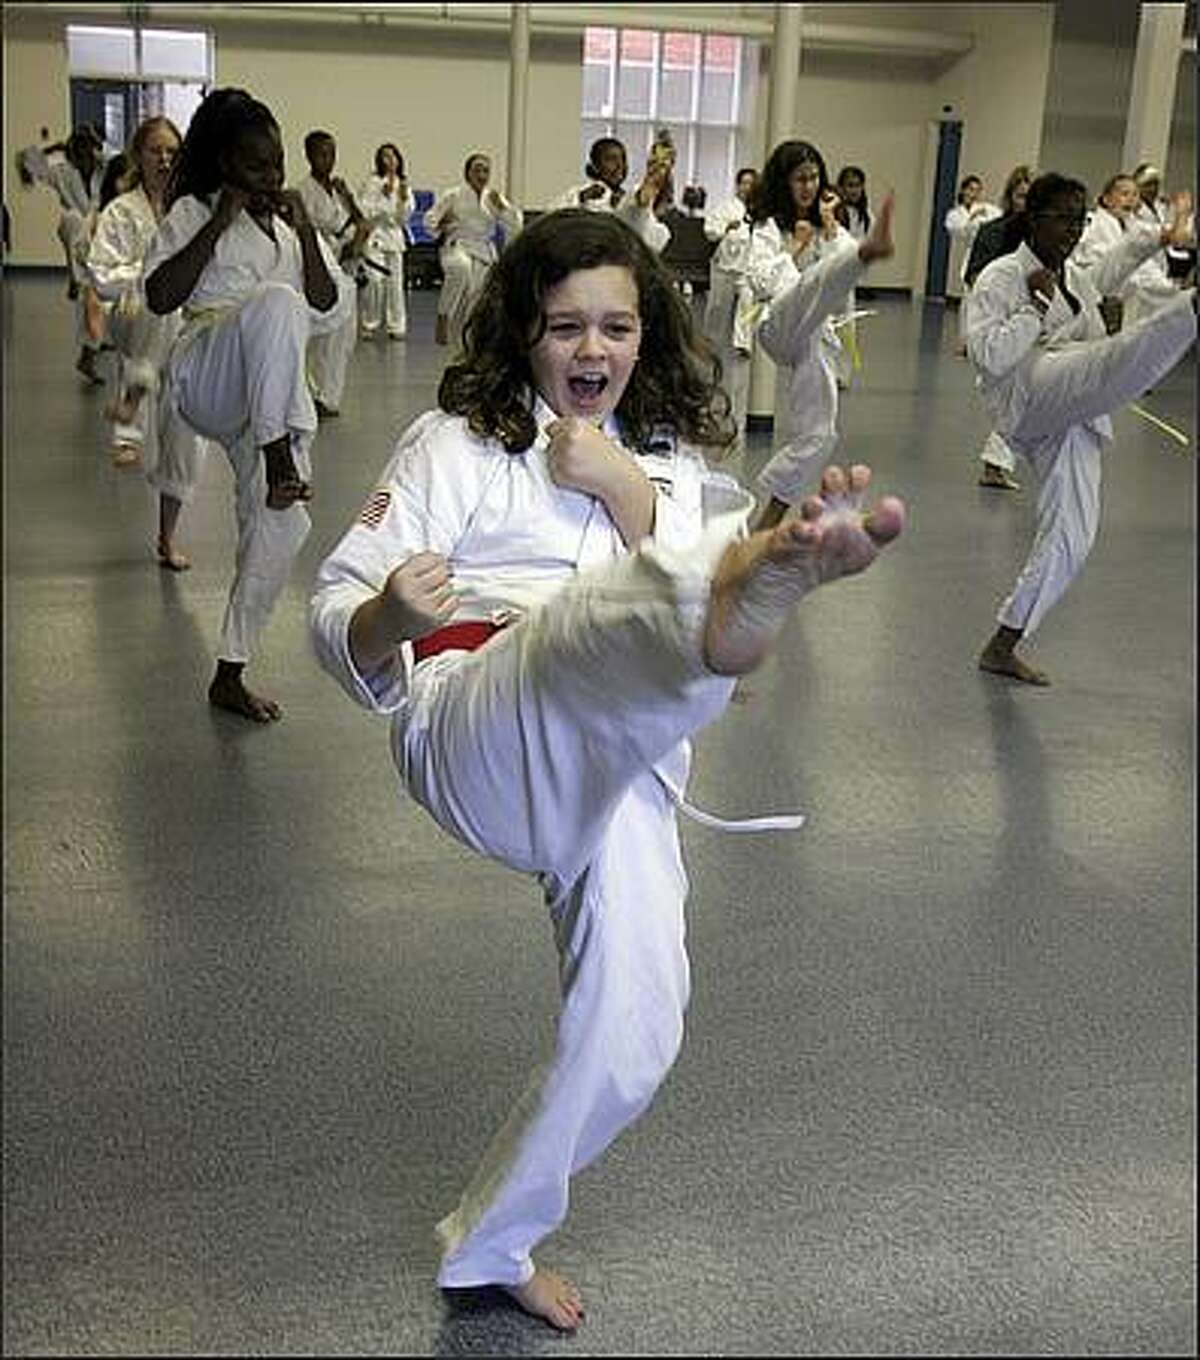 Seventh-grade student Cassandra Gill, who is now a junior black belt, practices with her classmates during gym class at Lake Washington Girls Middle School. Everyone is required to take one term of martial arts per year. Cassandra Gill: